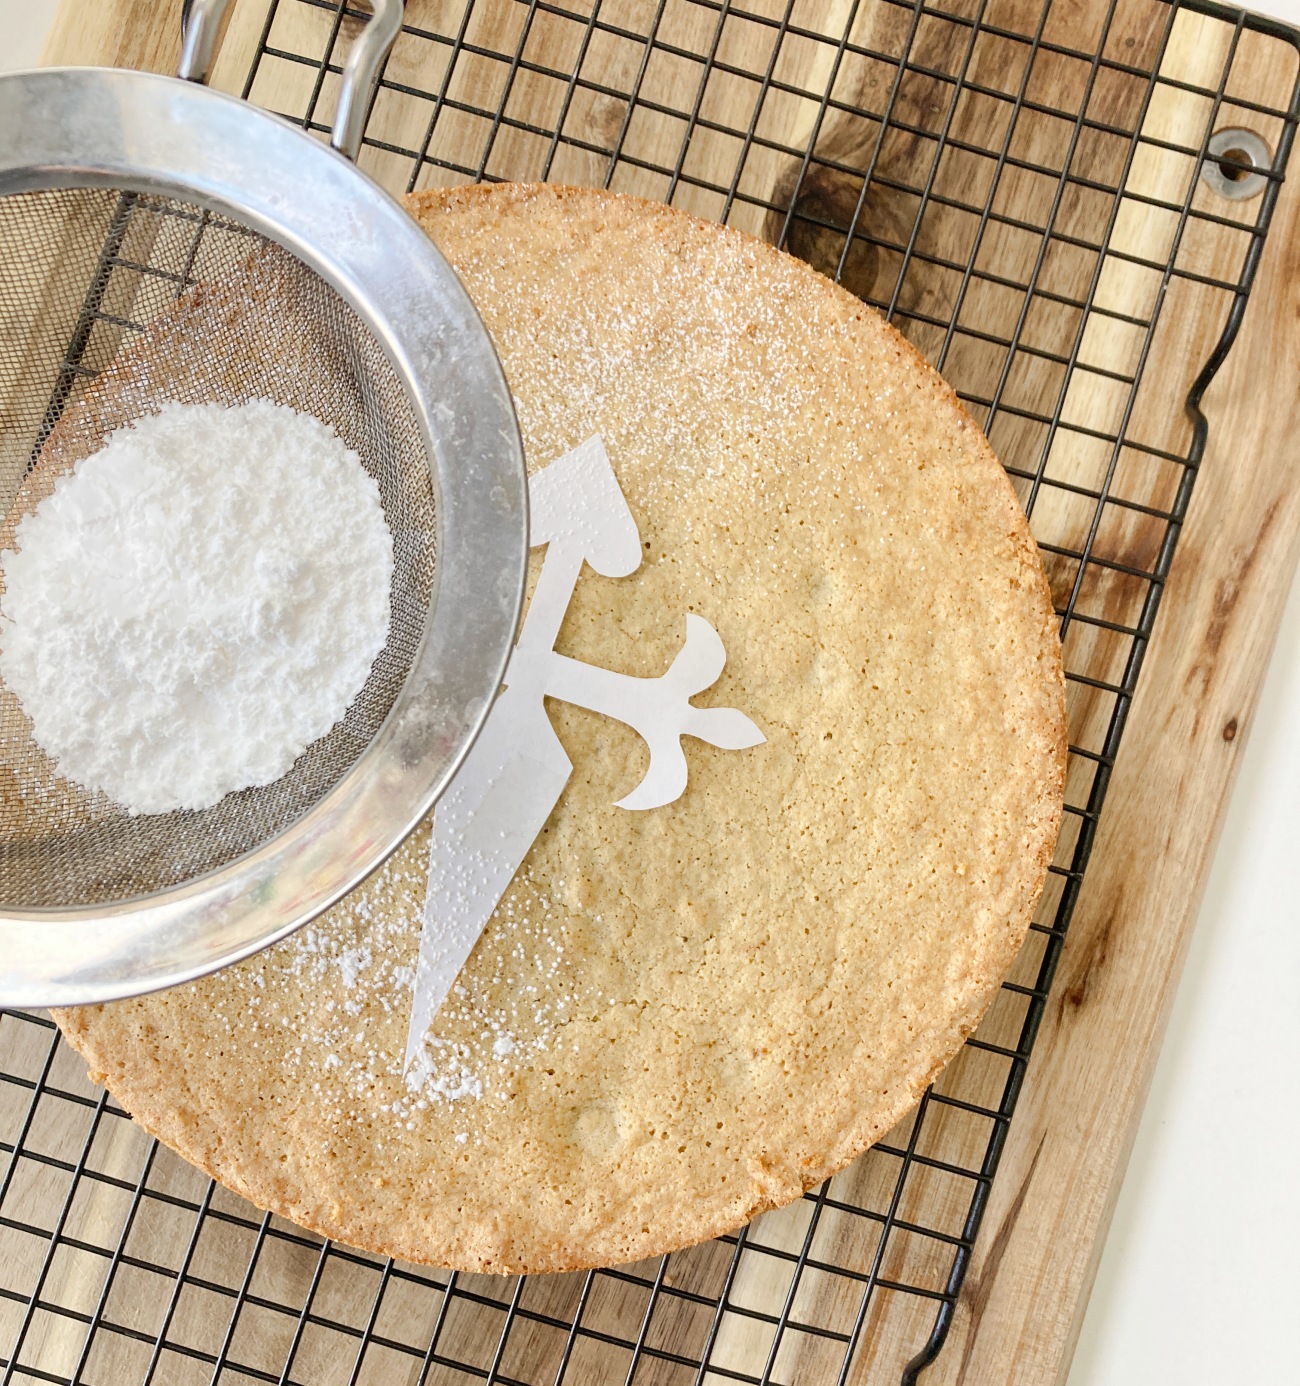 Allow to cool for 15 minutes before releasing from pan. Place on wire cooling rack and allow to cool completely before dusting with powdered sugar, preferably using a cross of St. James stencil.